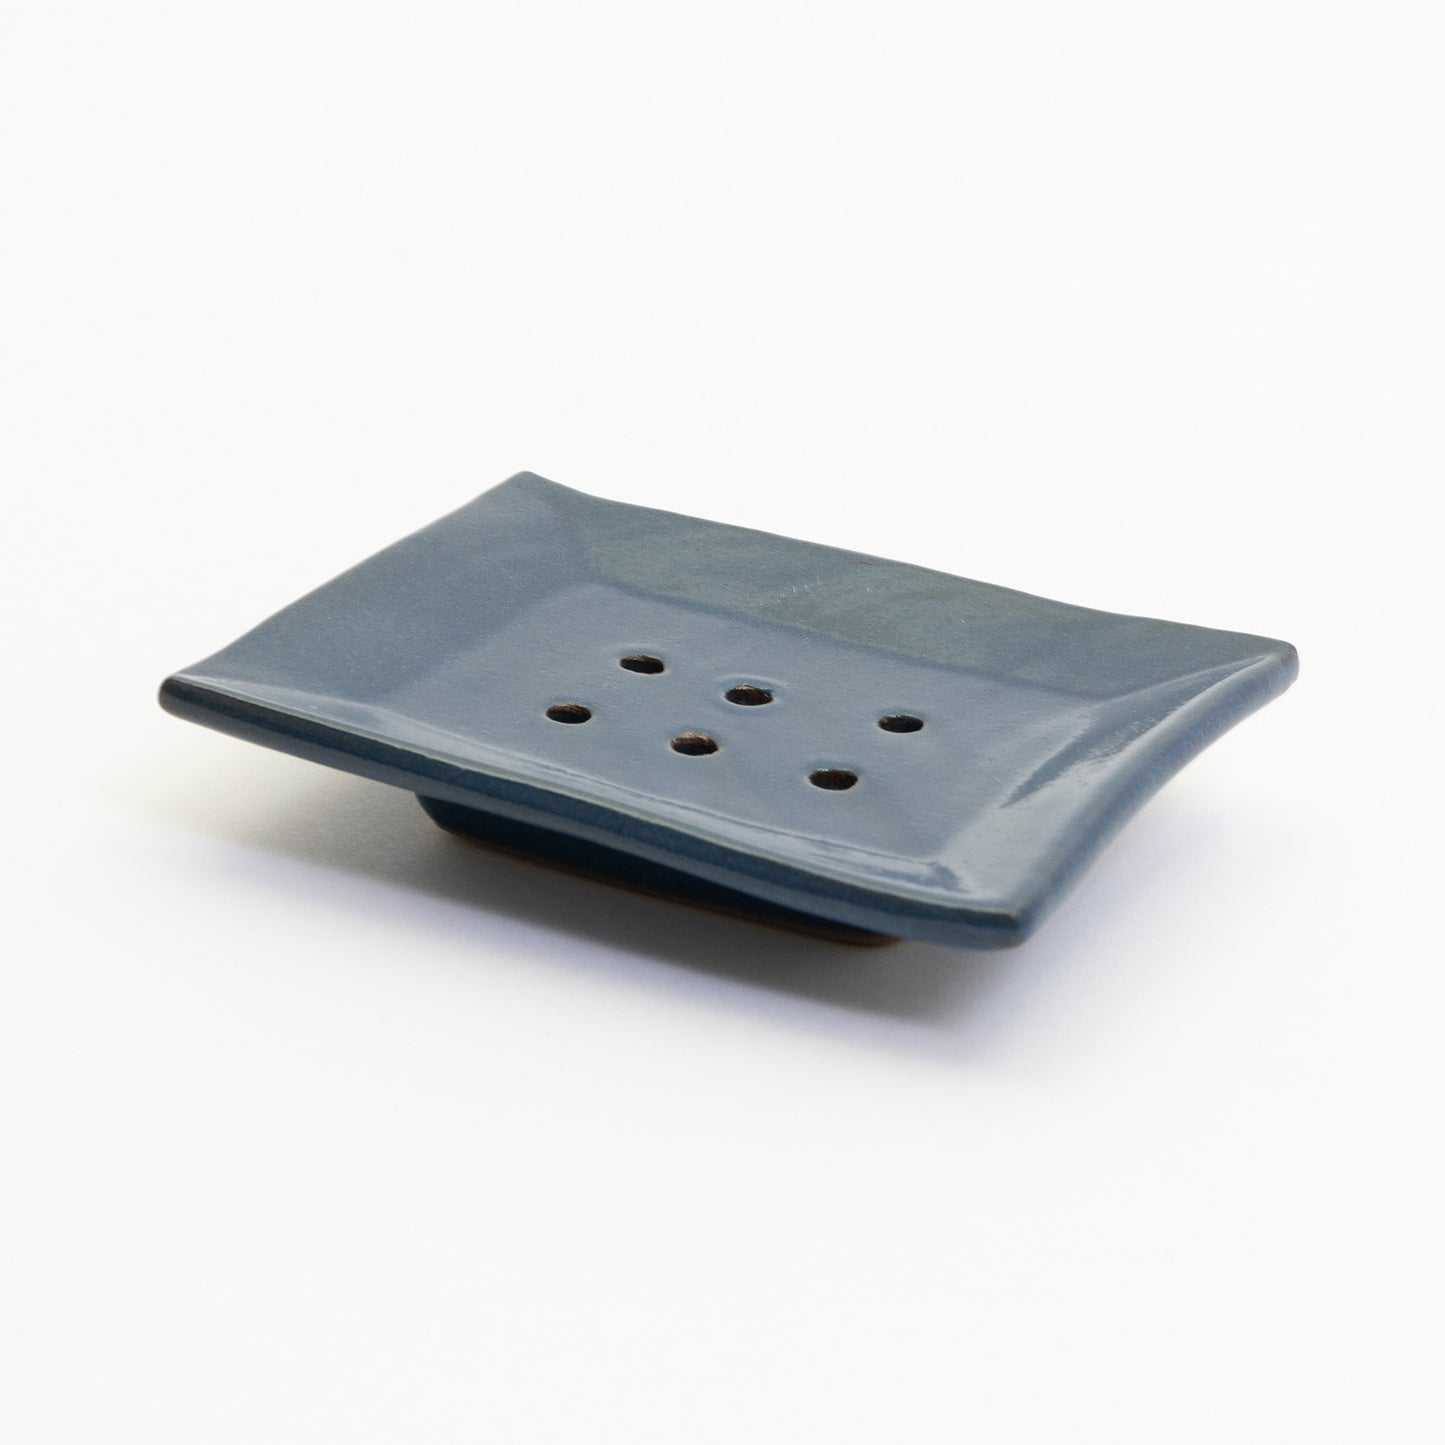 A cobalt blue stoneware soap dish pictured on a white background.